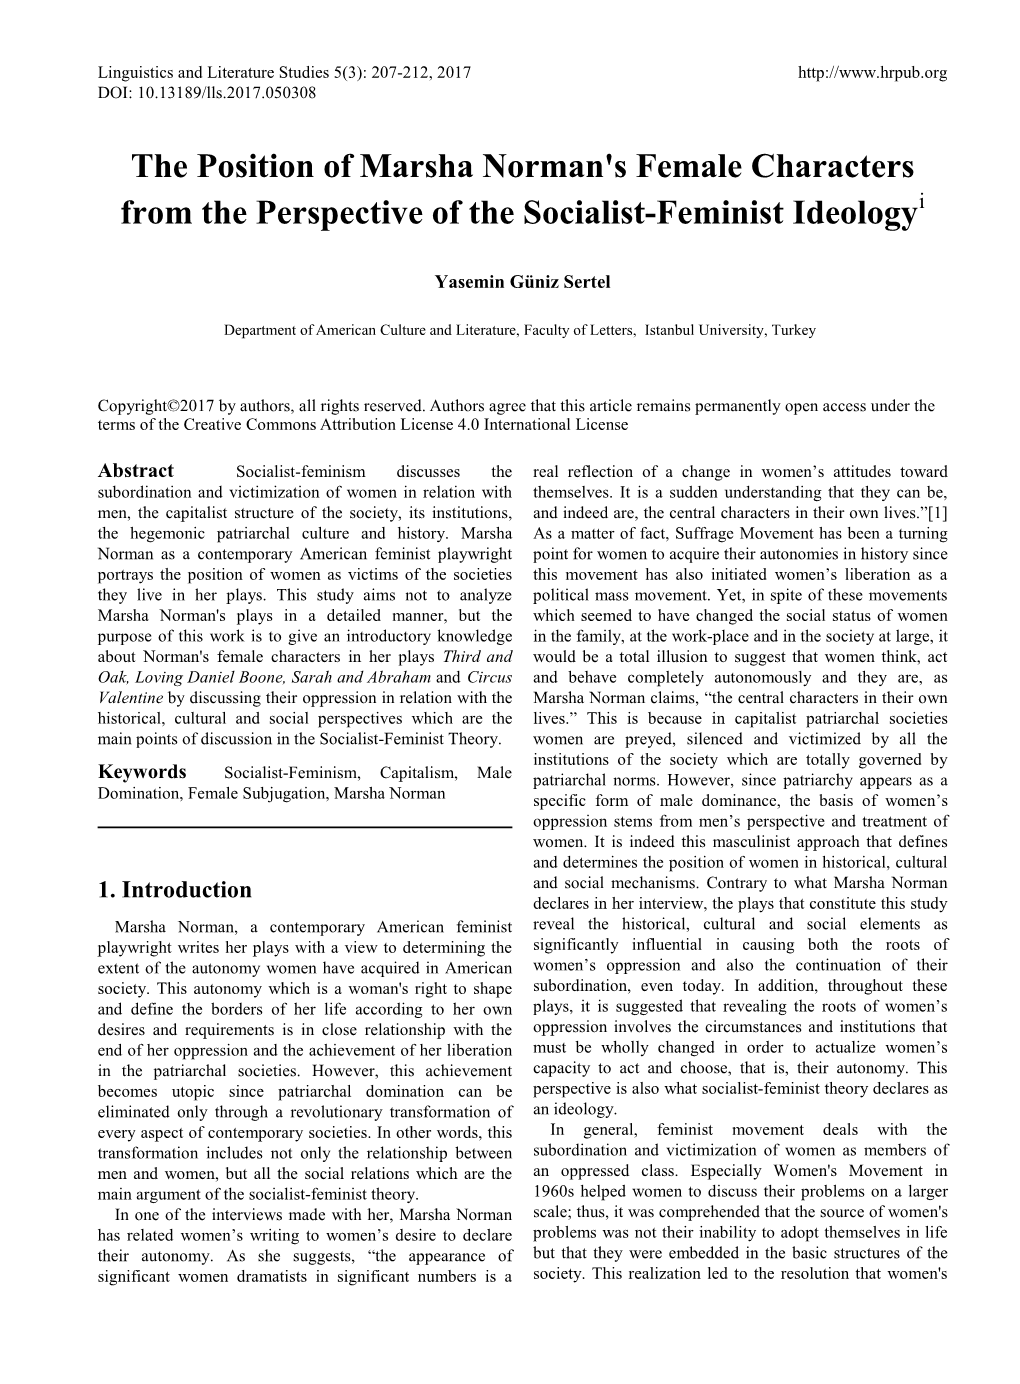 The Position of Marsha Norman's Female Characters from the Perspective of the Socialist-Feminist Ideologyi